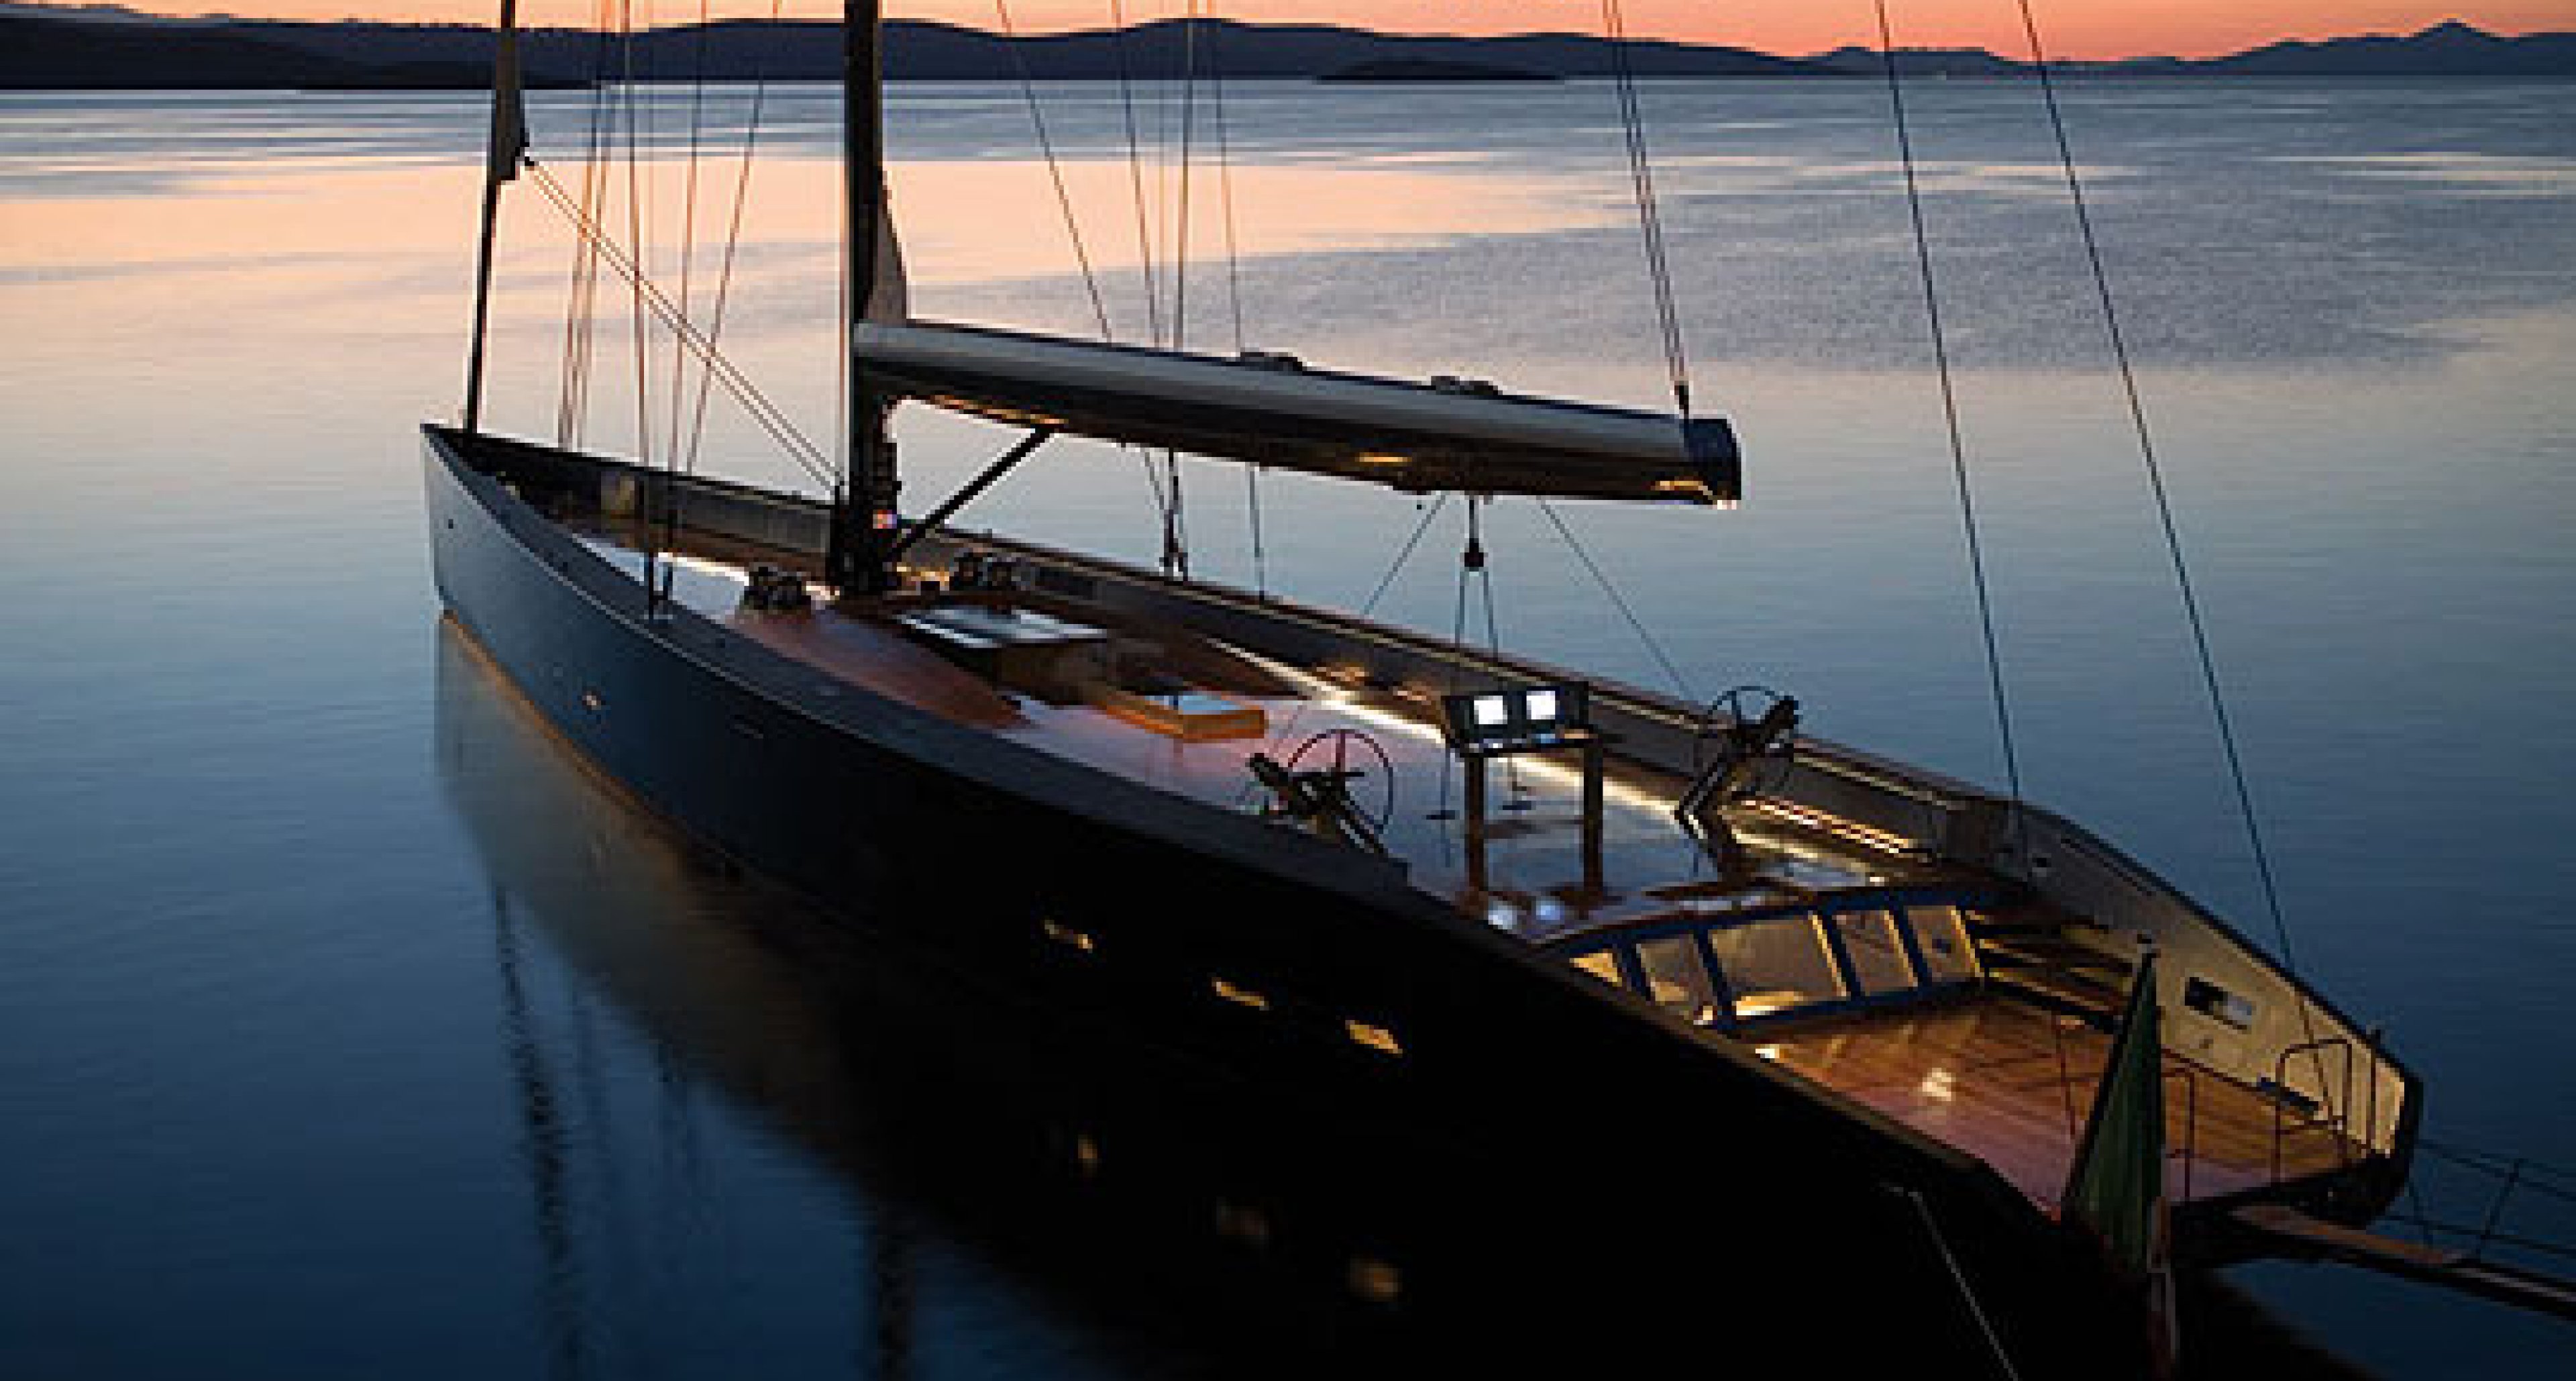 largest wally yacht